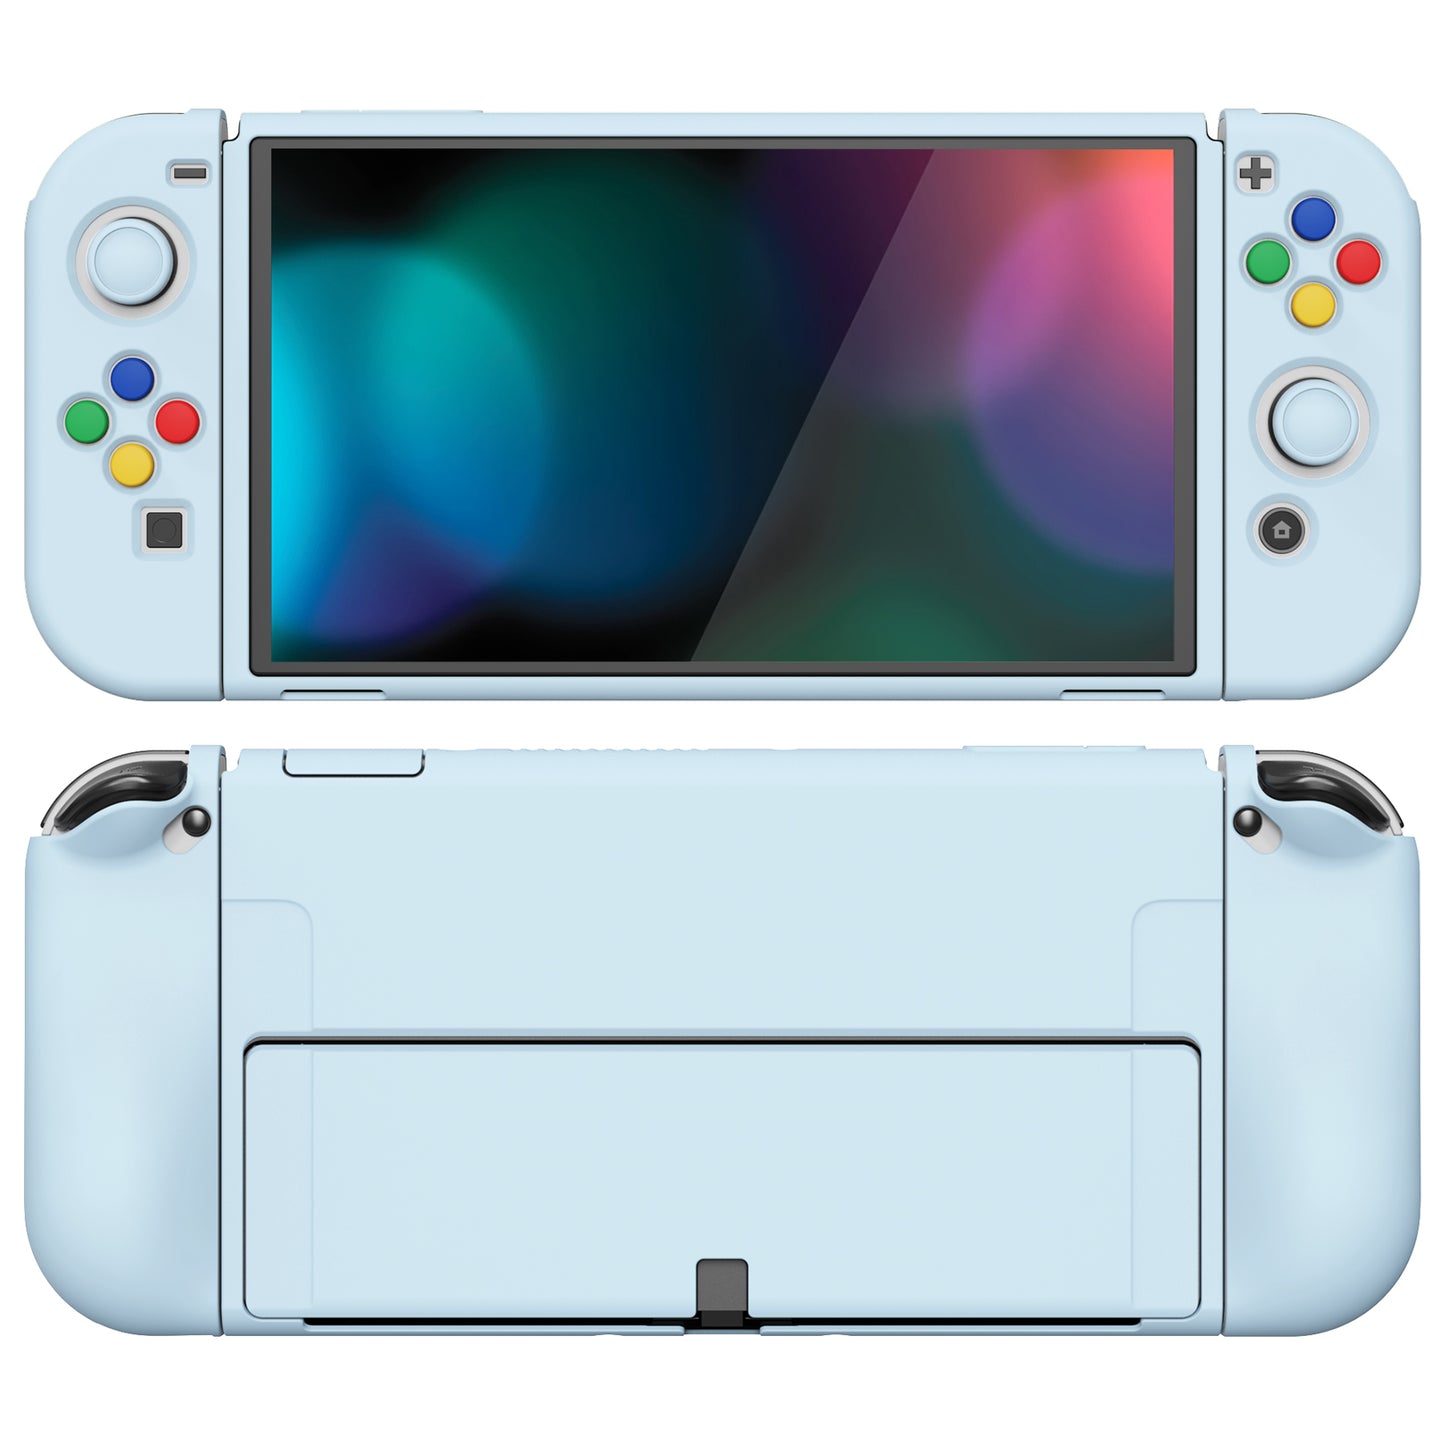 PlayVital ZealProtect Soft Protective Case for Switch OLED, Flexible Protector Joycon Grip Cover for Switch OLED with Thumb Grip Caps & ABXY Direction Button Caps - Sky Blue - XSOYM5009 playvital